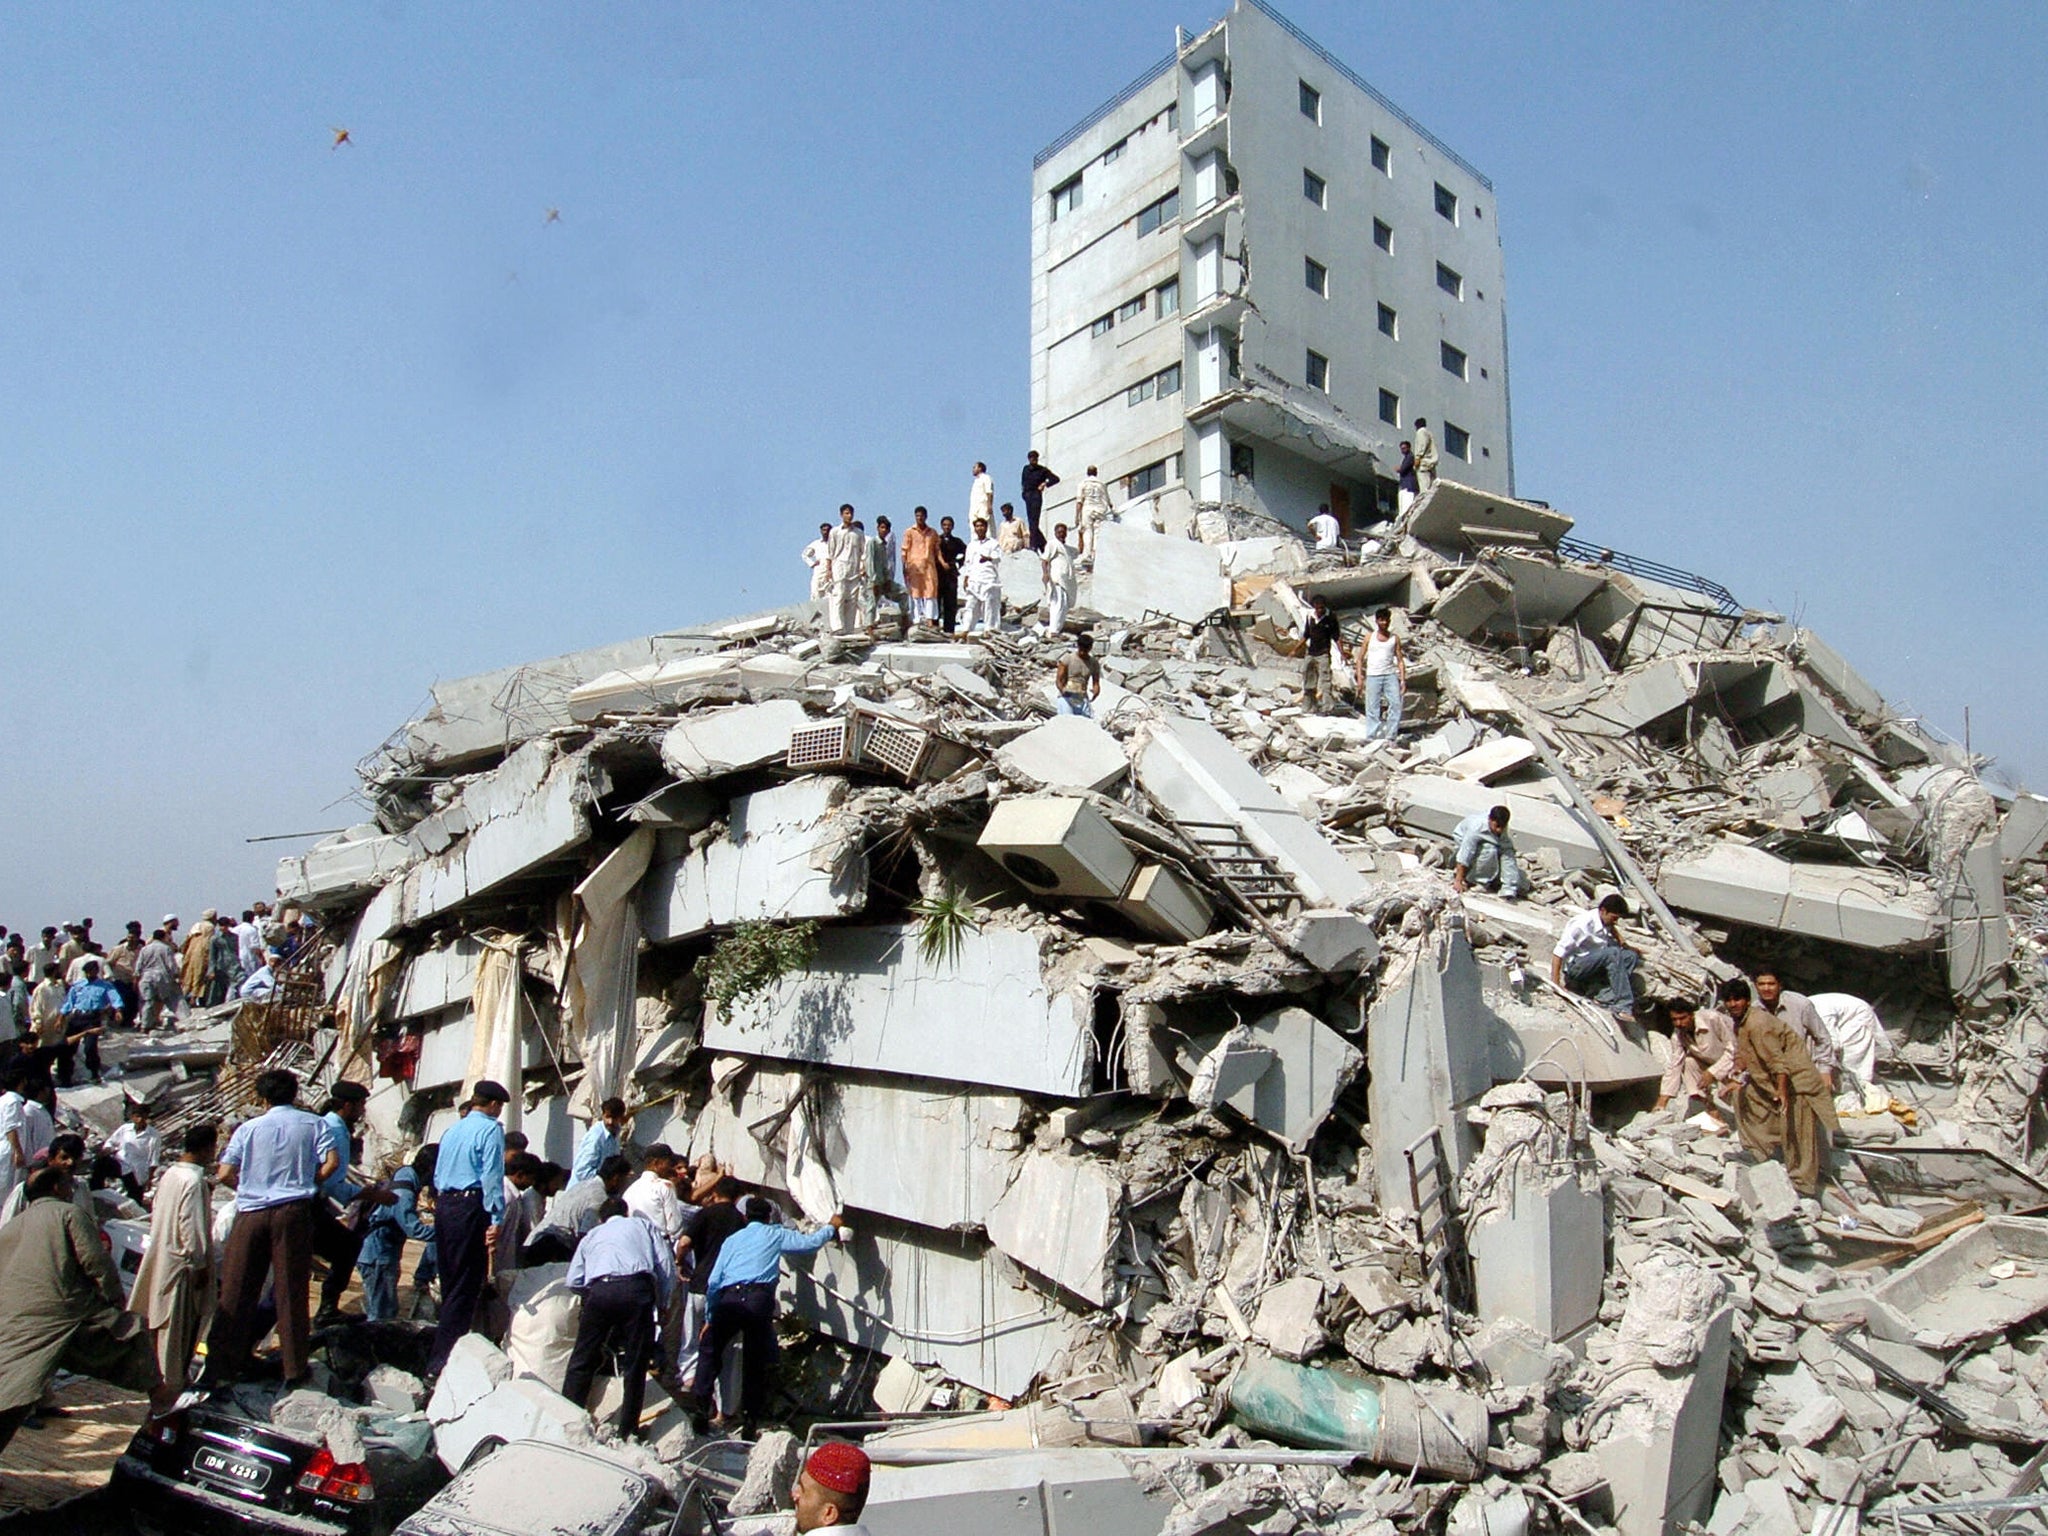 Residents search the wreckage of a building hit by a strong earthquake in Islamabad in October 2005